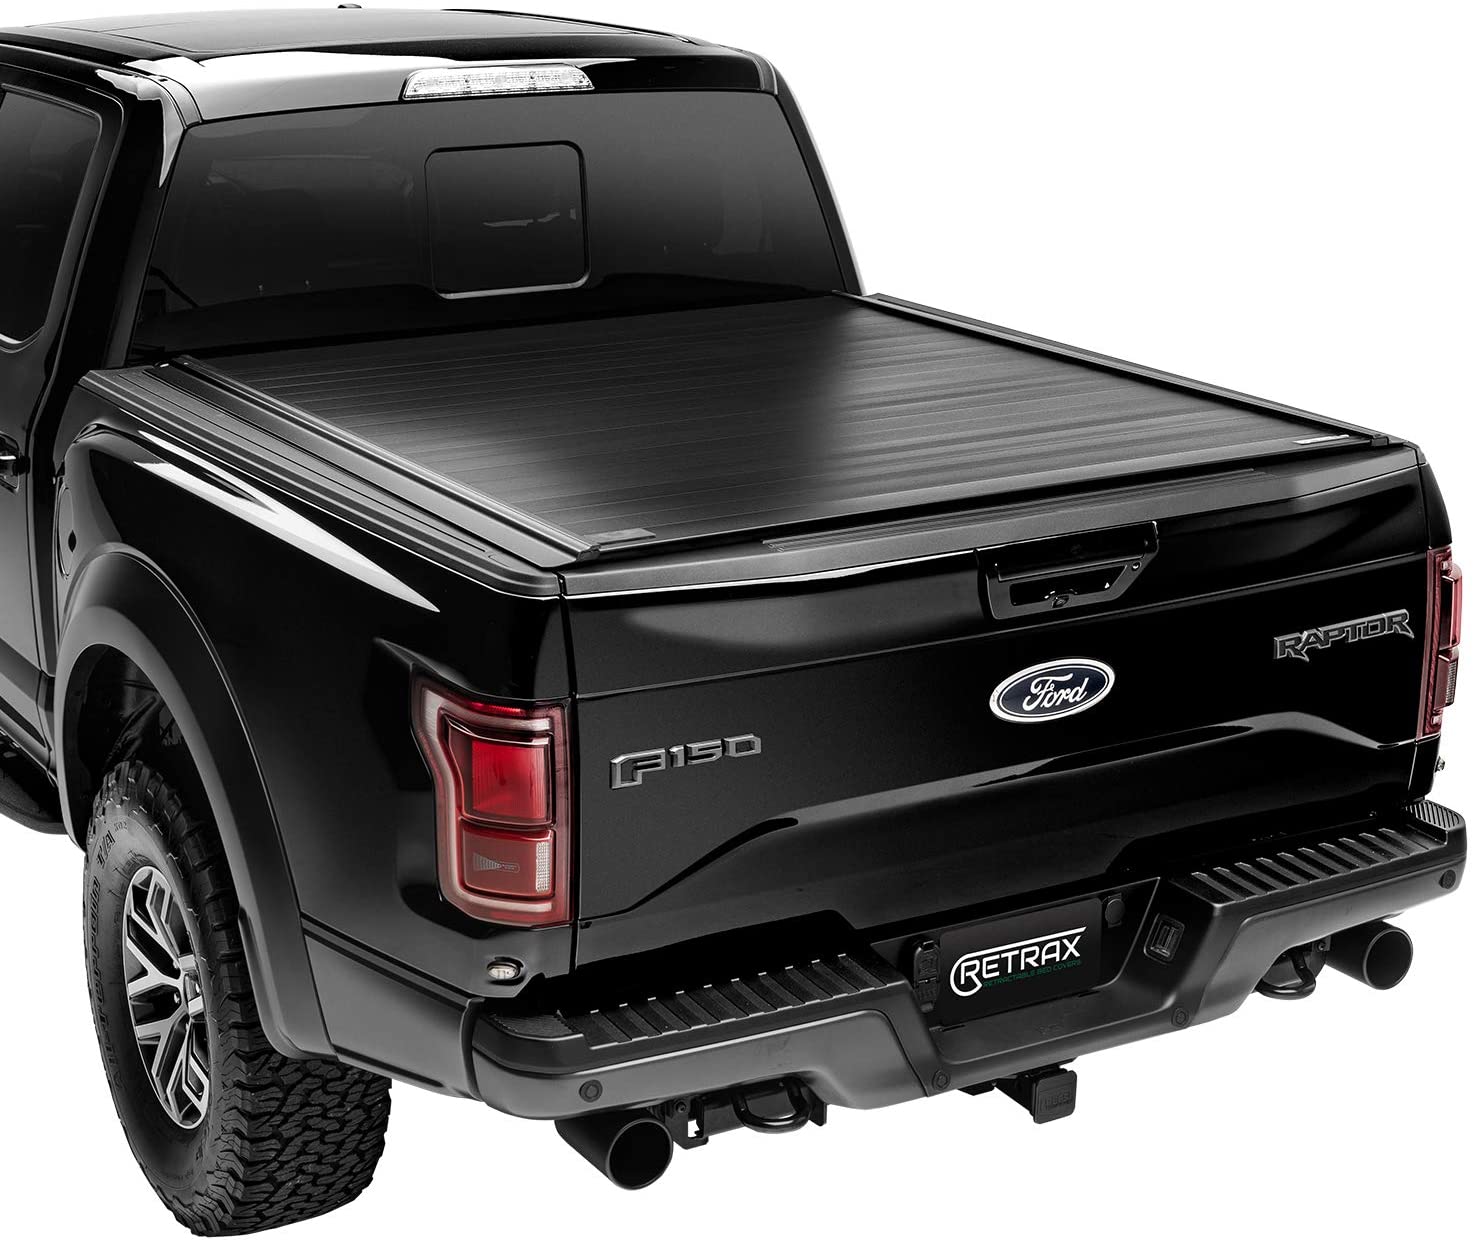 Ford F-Series/Ford Ranger Retrax PowerTraxPRO XR Truck Bed Cover